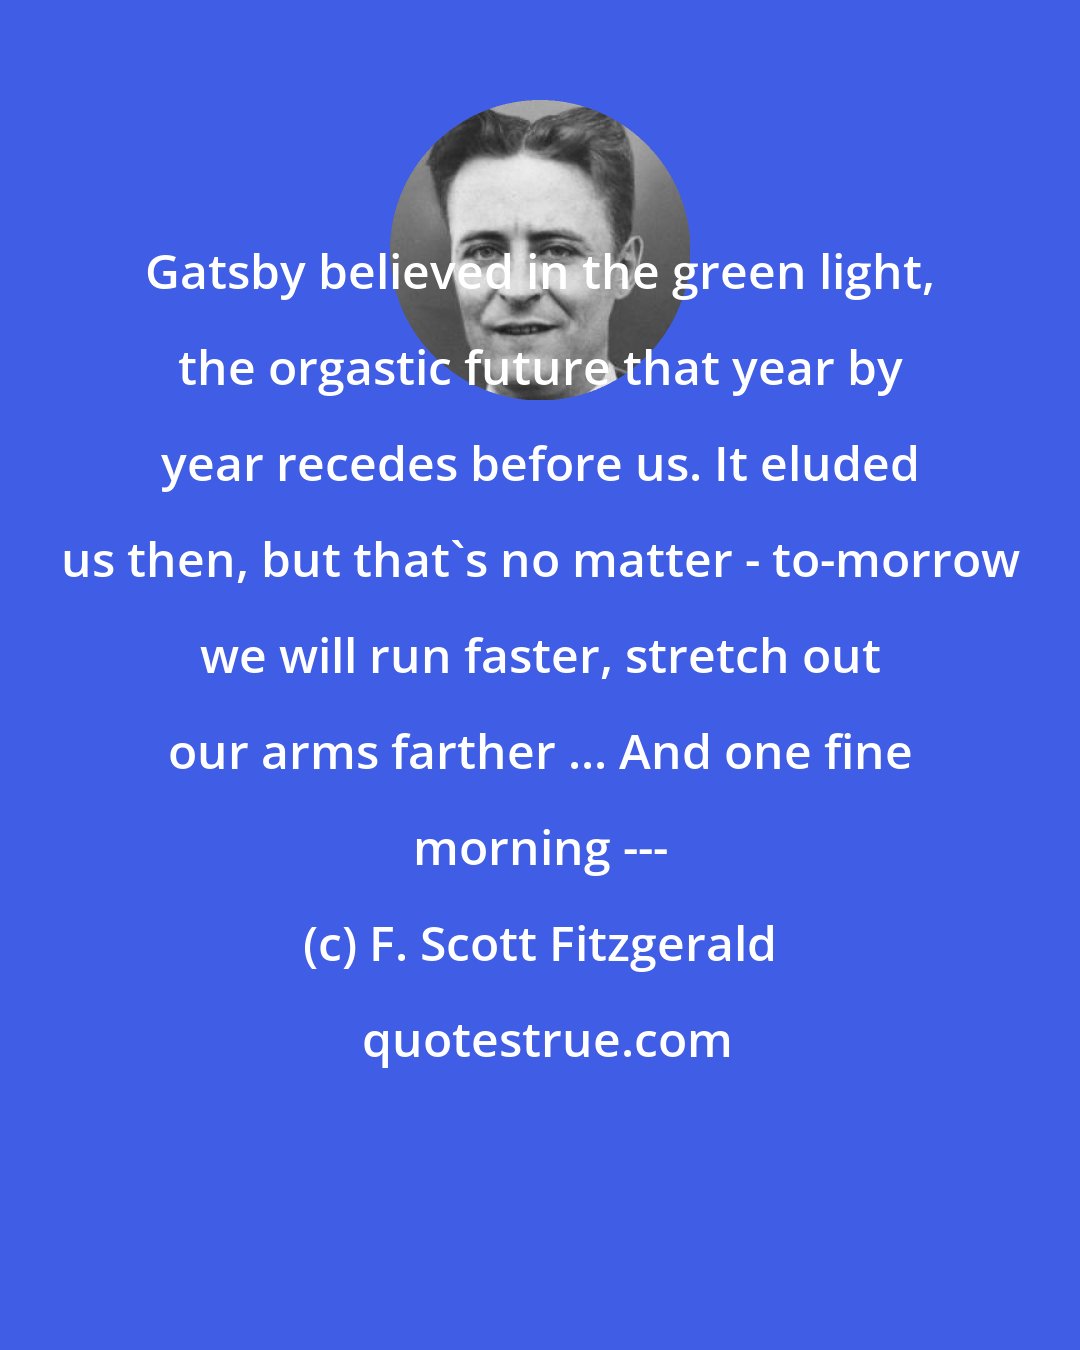 F. Scott Fitzgerald: Gatsby believed in the green light, the orgastic future that year by year recedes before us. It eluded us then, but that's no matter - to-morrow we will run faster, stretch out our arms farther ... And one fine morning ---